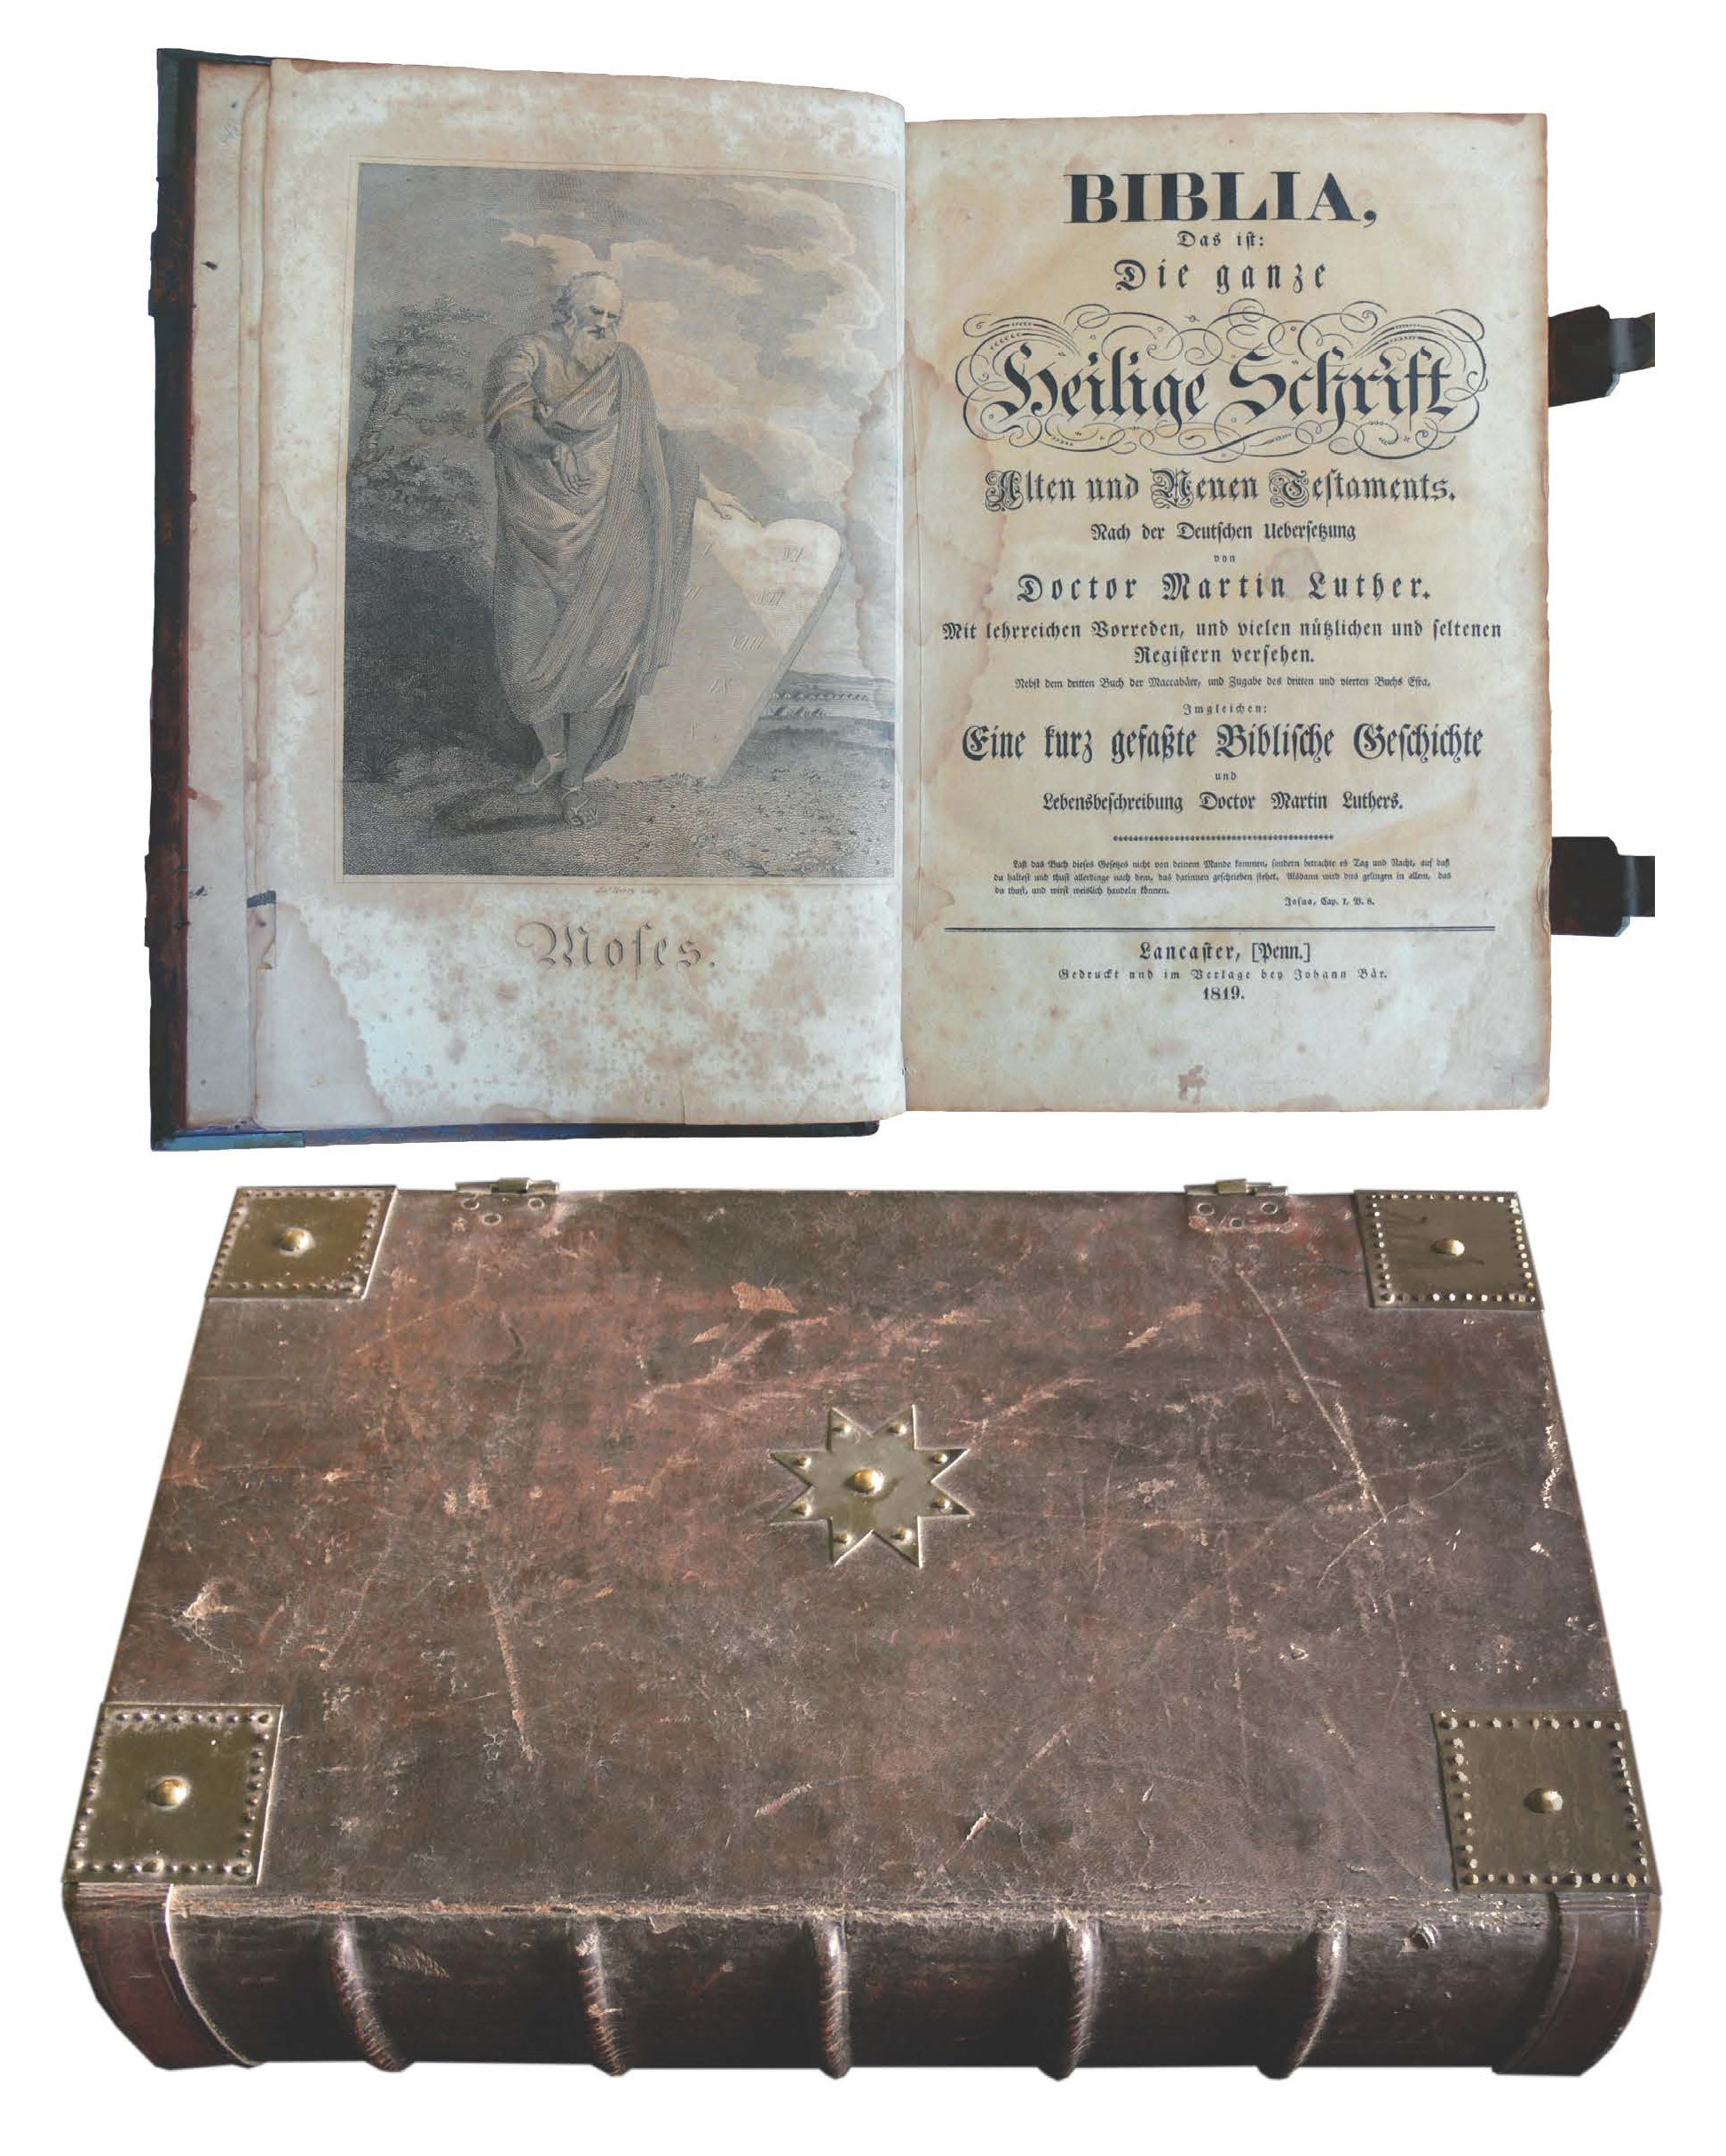 An image of the outside and title page of the Baer Bible. The outside is worn leather with metal detailing on each corner of the cover. In the center is an 8-pointed star. There are two clasps on the right-hand side. The cover page shows a print of Moses on the left-hand page, with extremely detailed black German scripts.